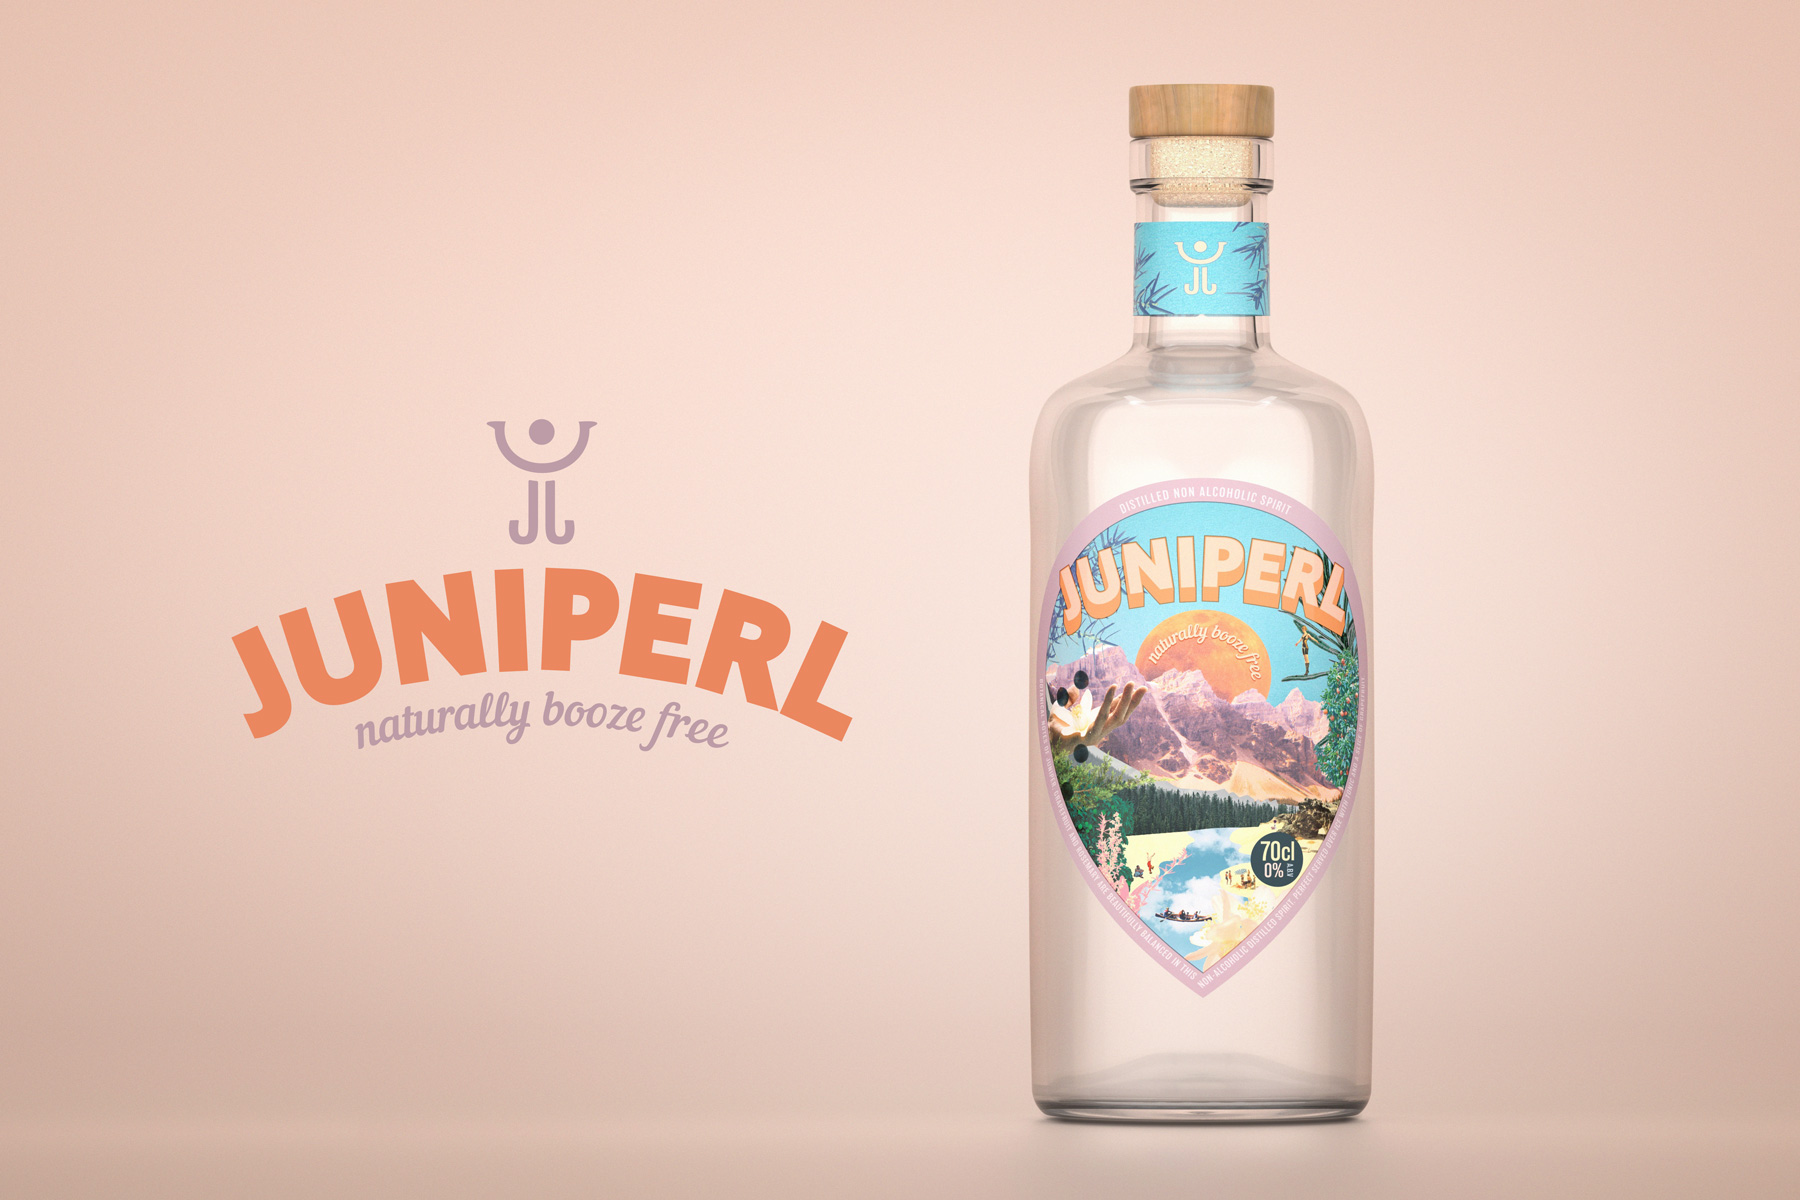 CGI Product Photography for Juniperl alcohol free gin (1)